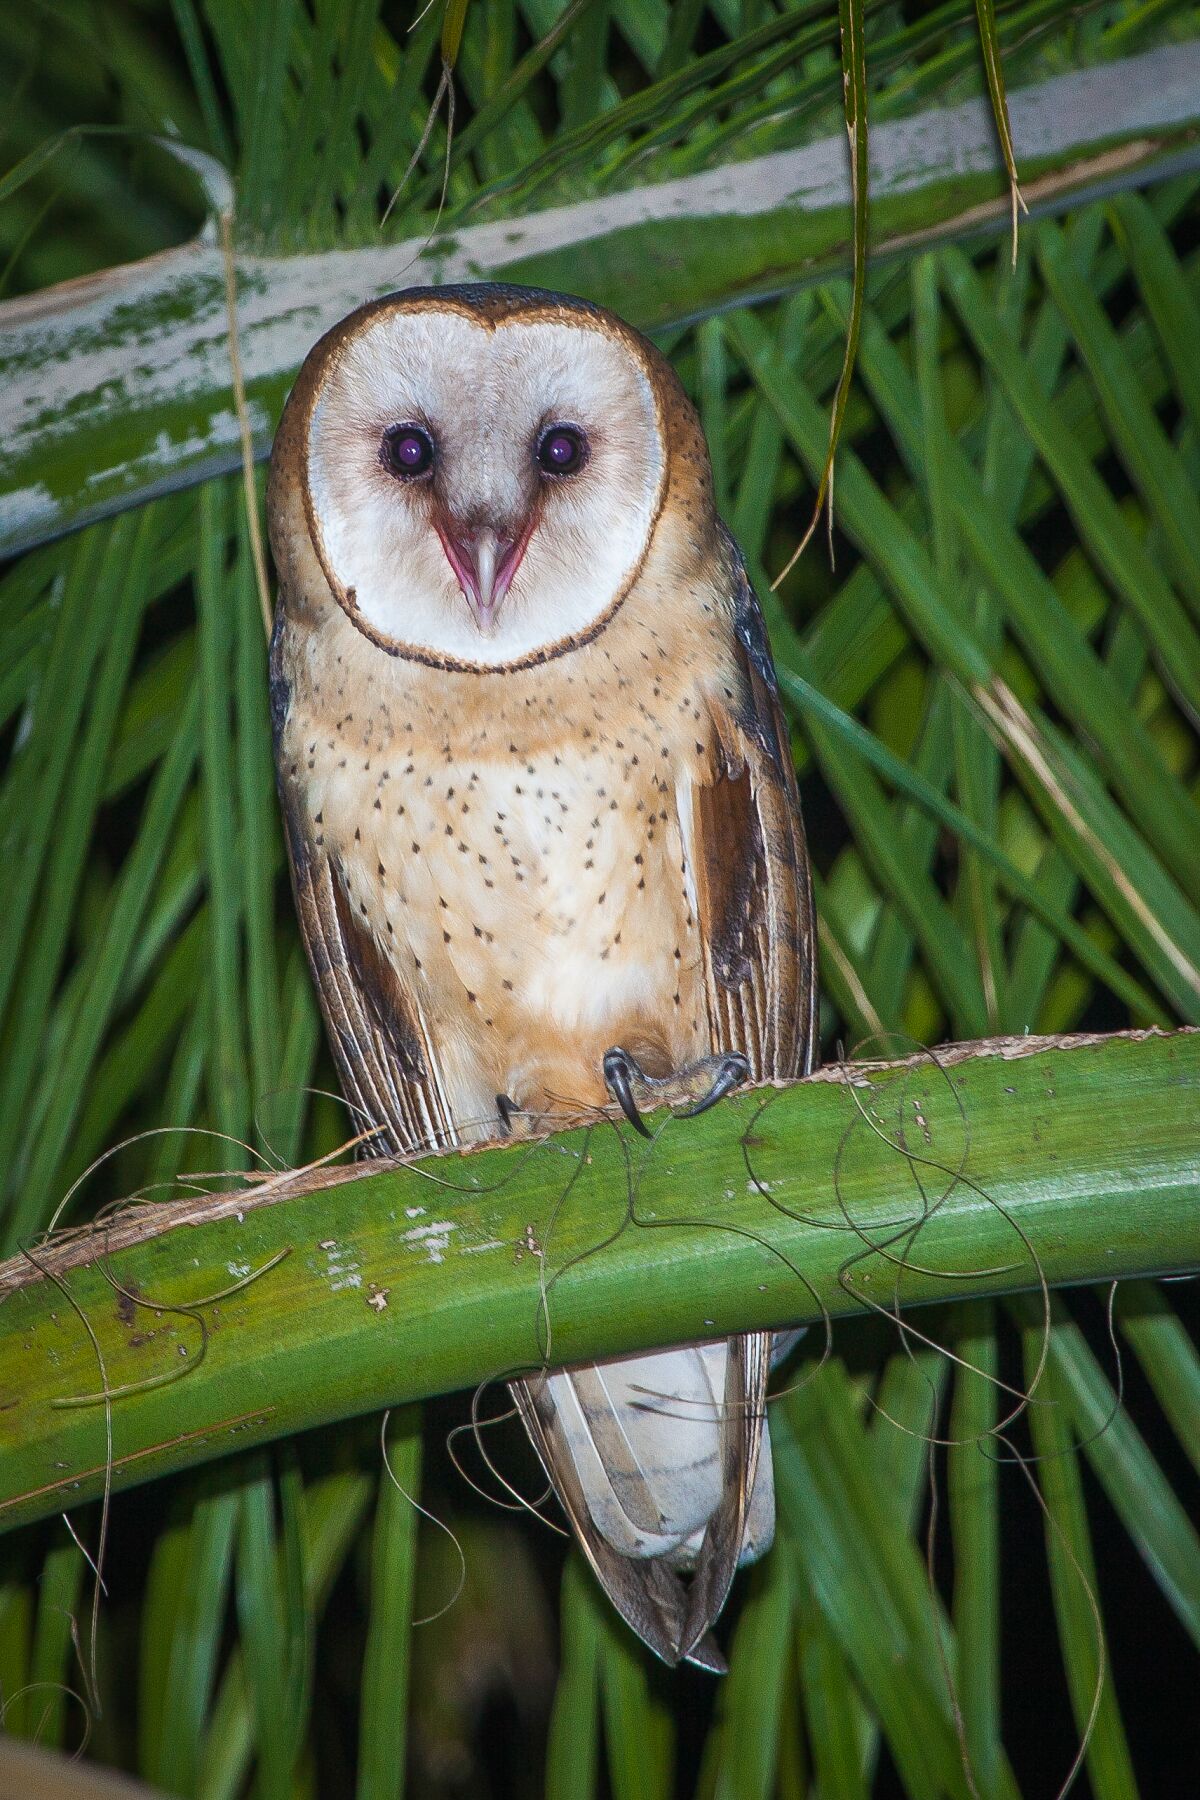 Barney the barn owl has been a frequent visitor to the well-landscaped property at Mt. Whoville.